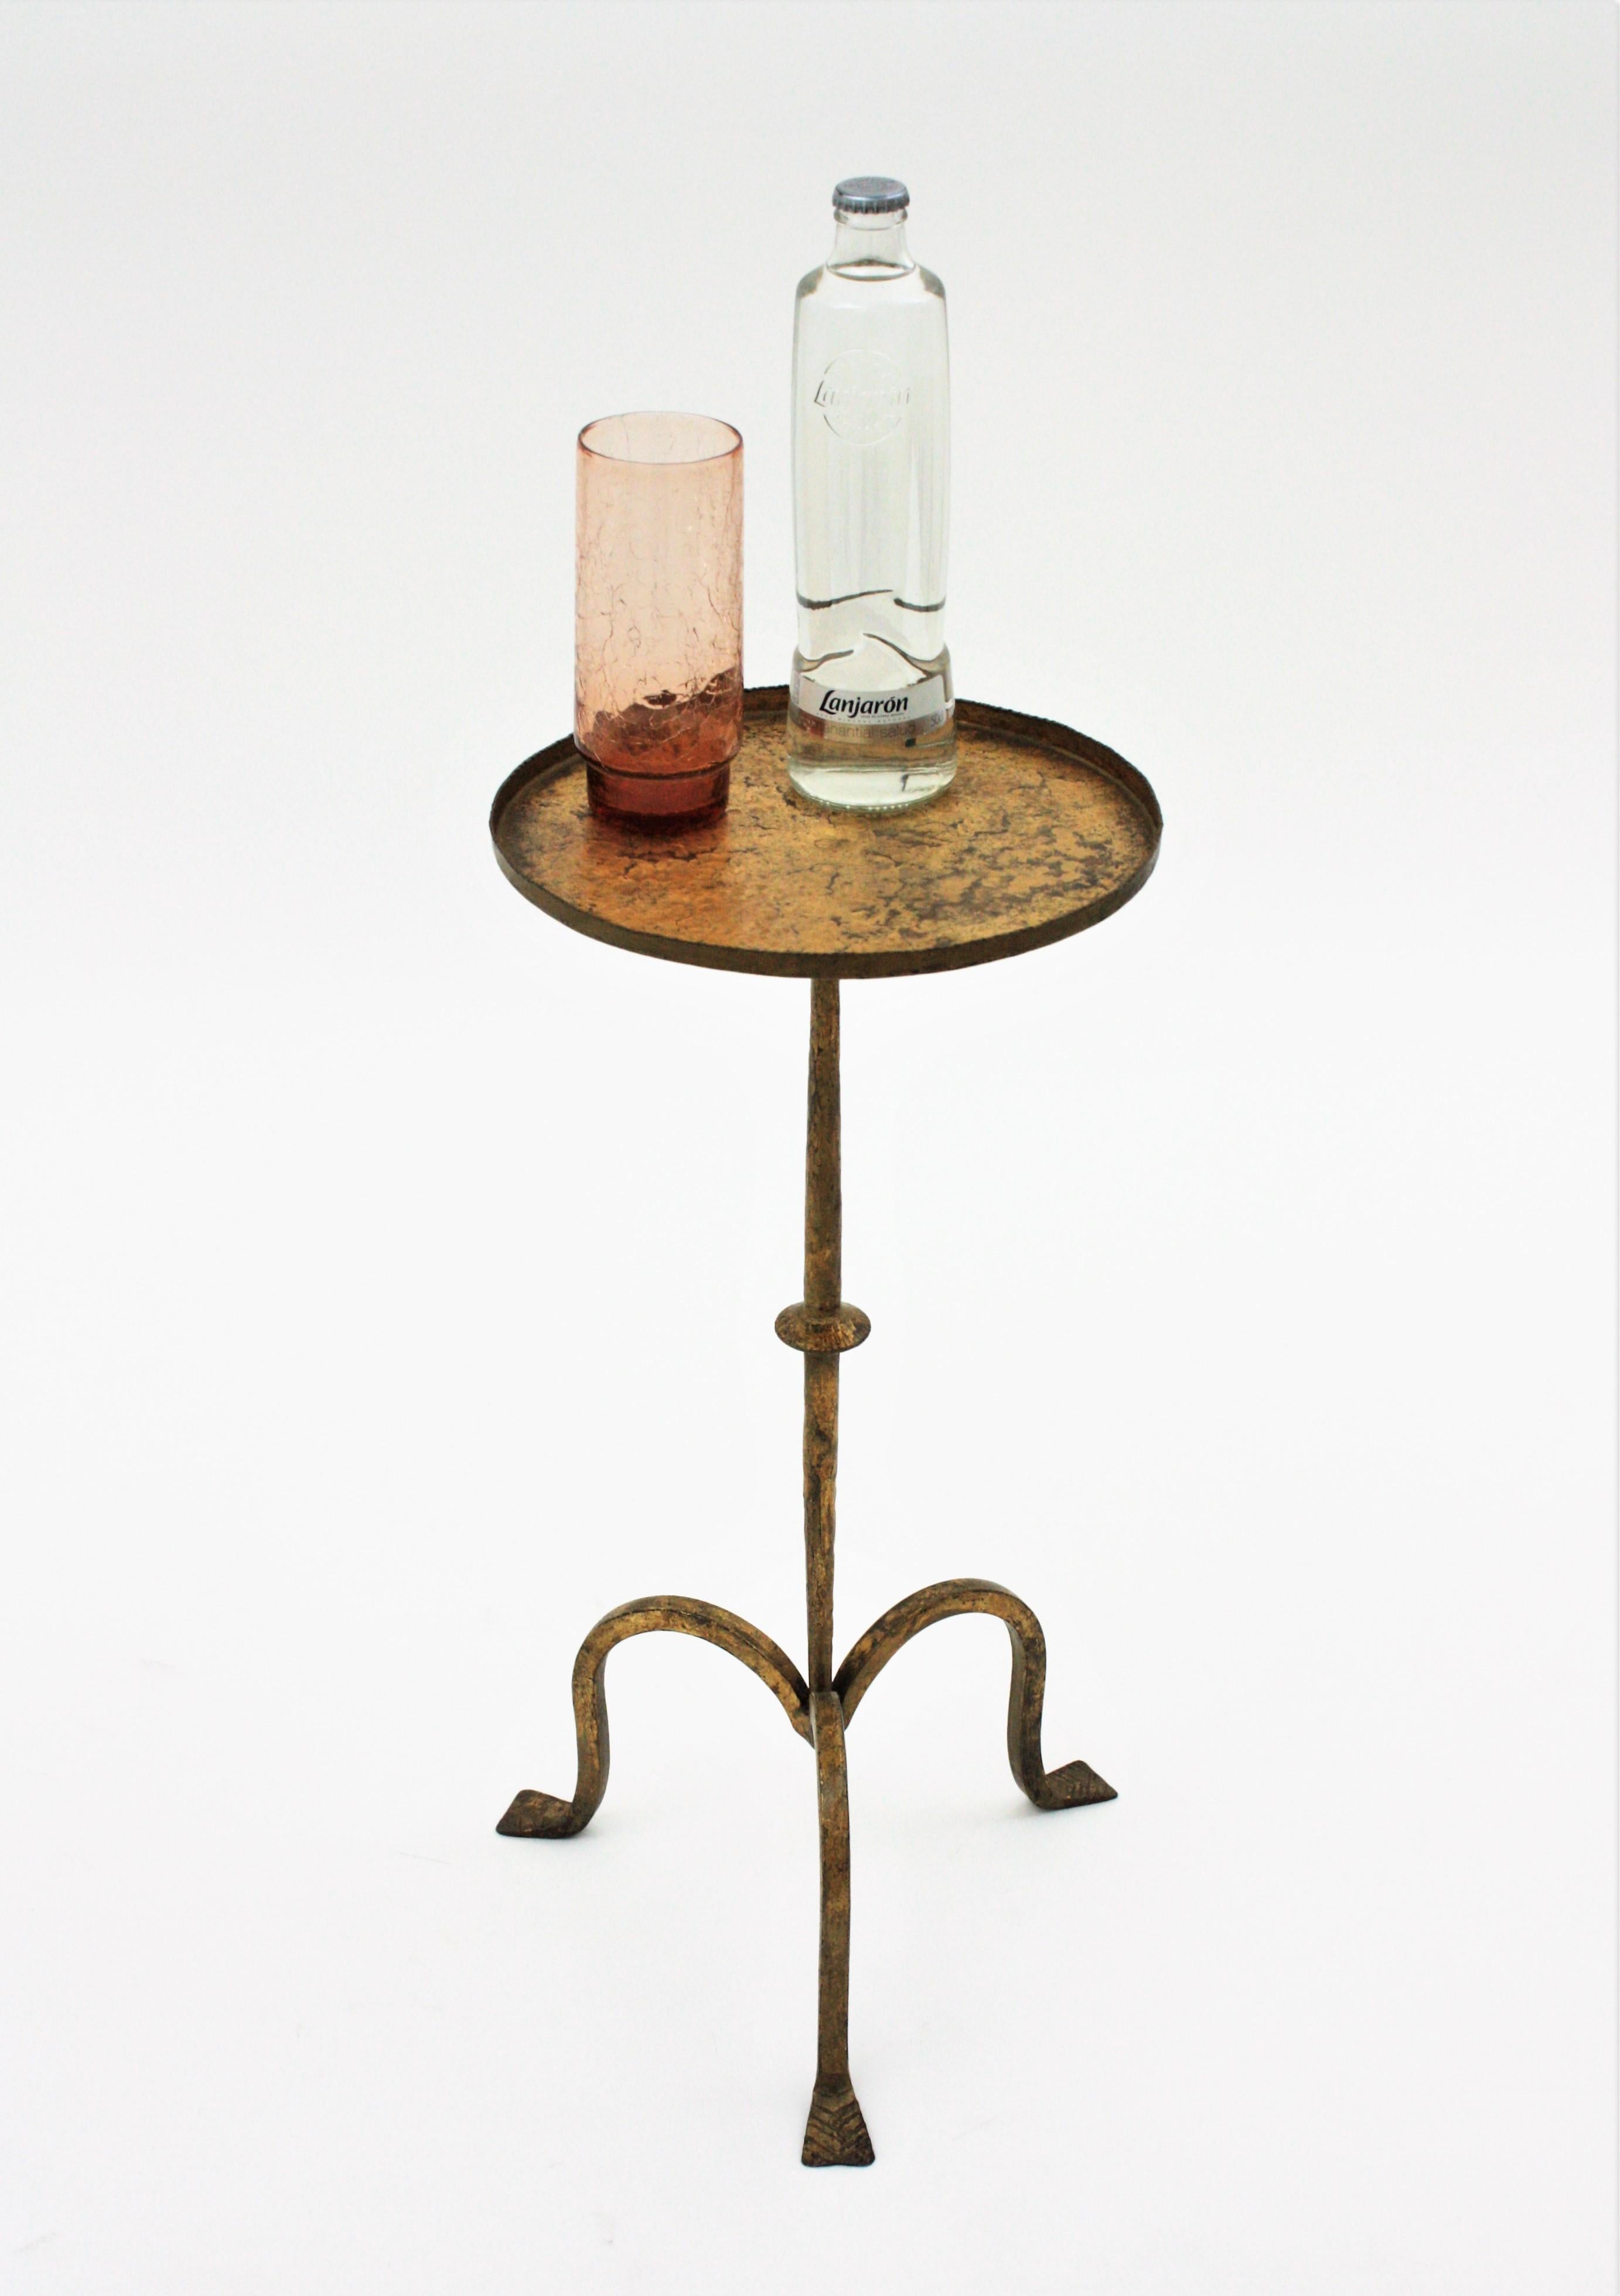 Beautiful hand-hammered gilt wrought iron occasional drinks table on a tripod base, Spain, 1940s
Entirely made in hand forged iron. Original gold leaf gilding and beautiful patina
It has a clean design inspired in Gothic style. The round top has a